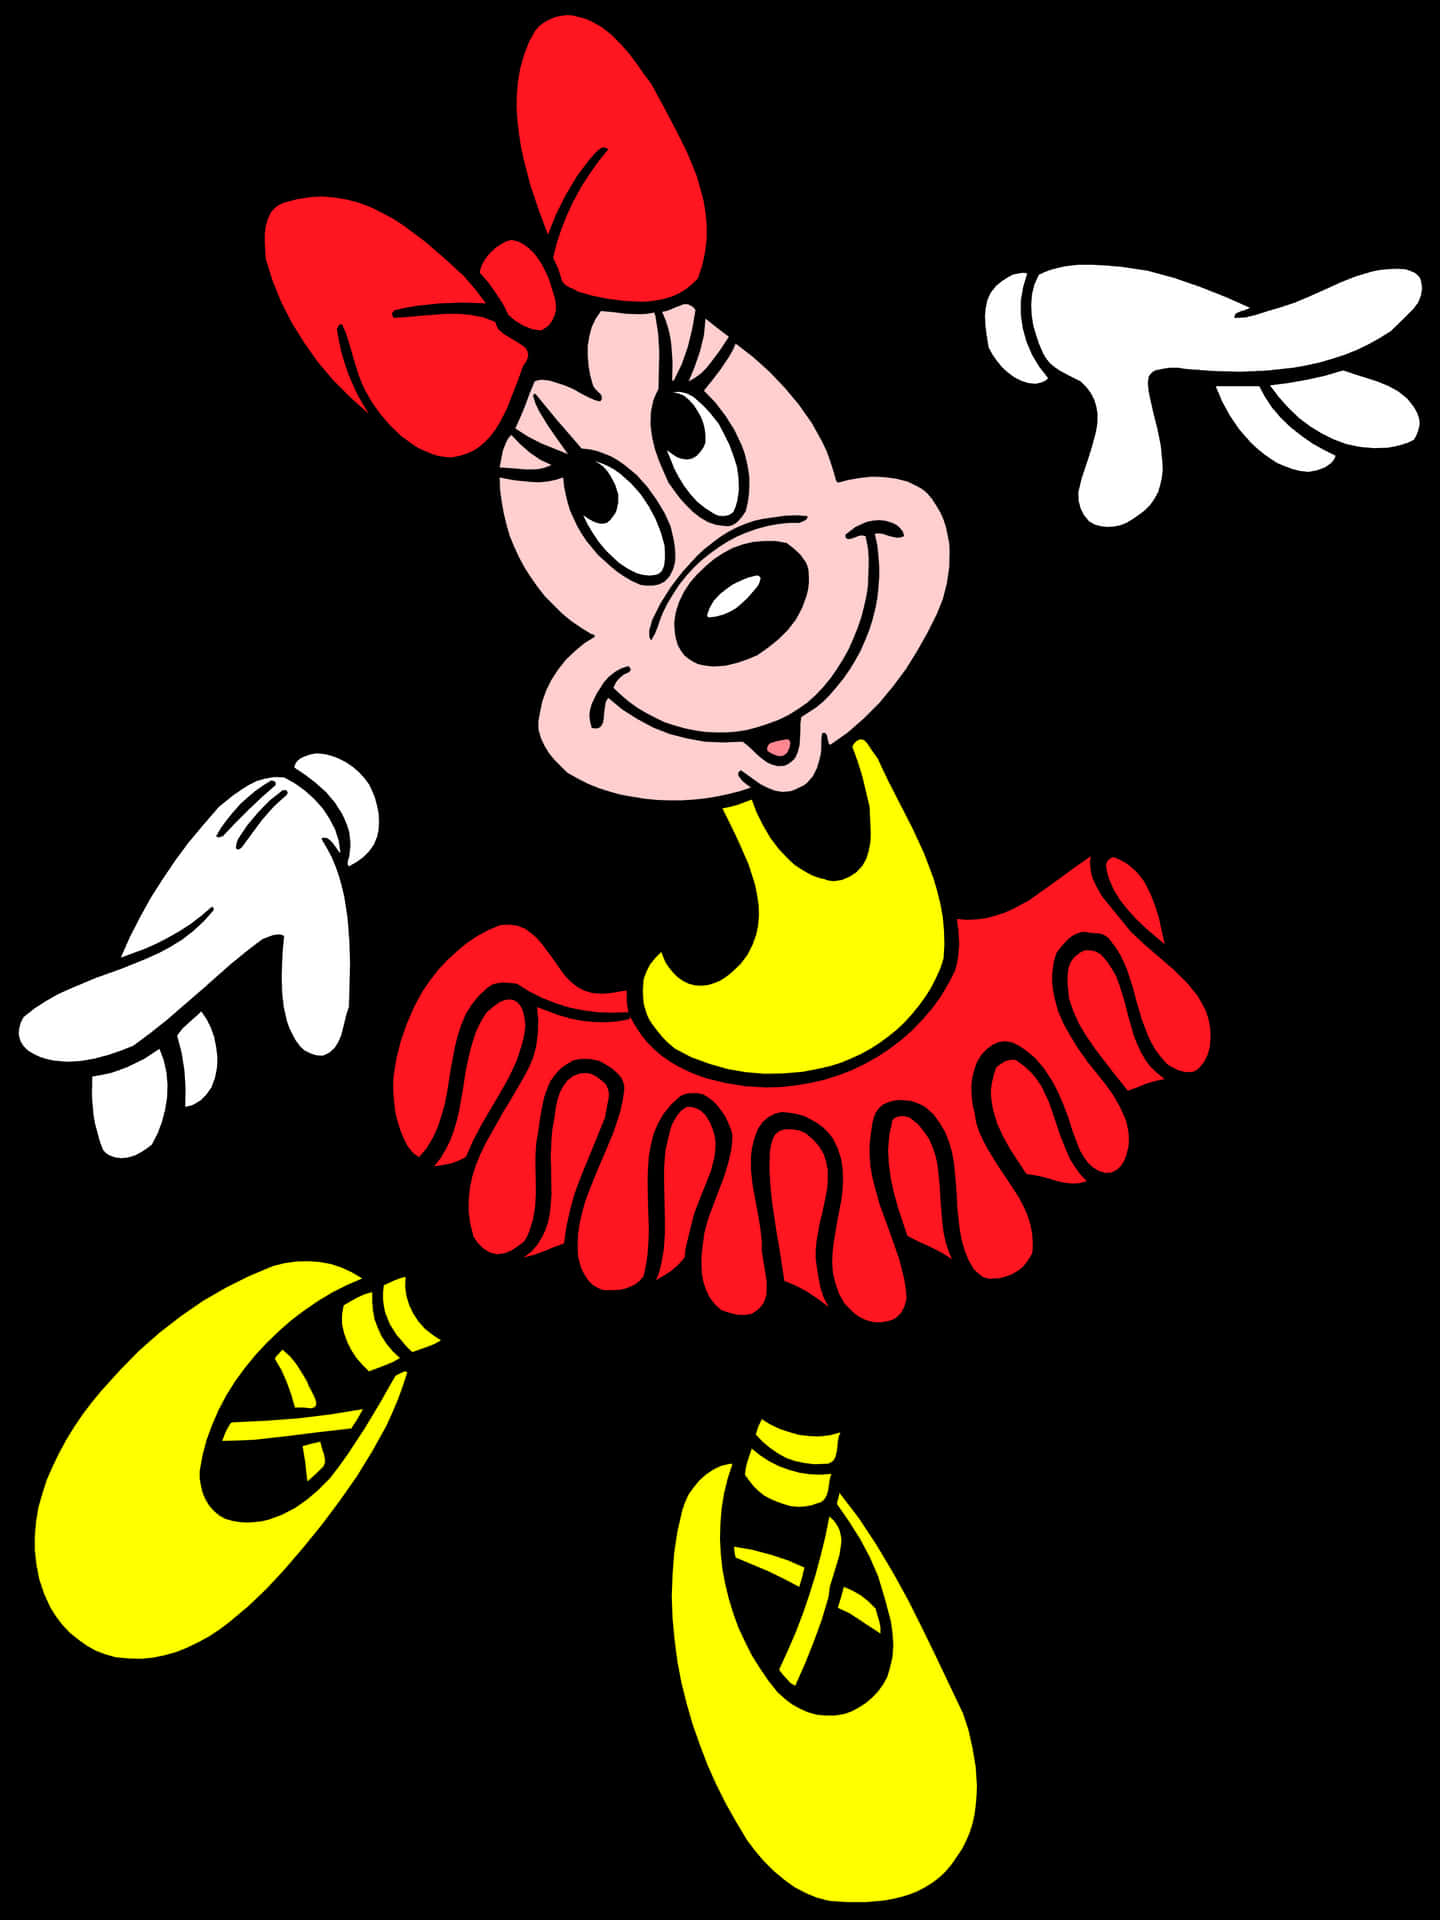 Classic Minnie Mouse Illustration PNG image